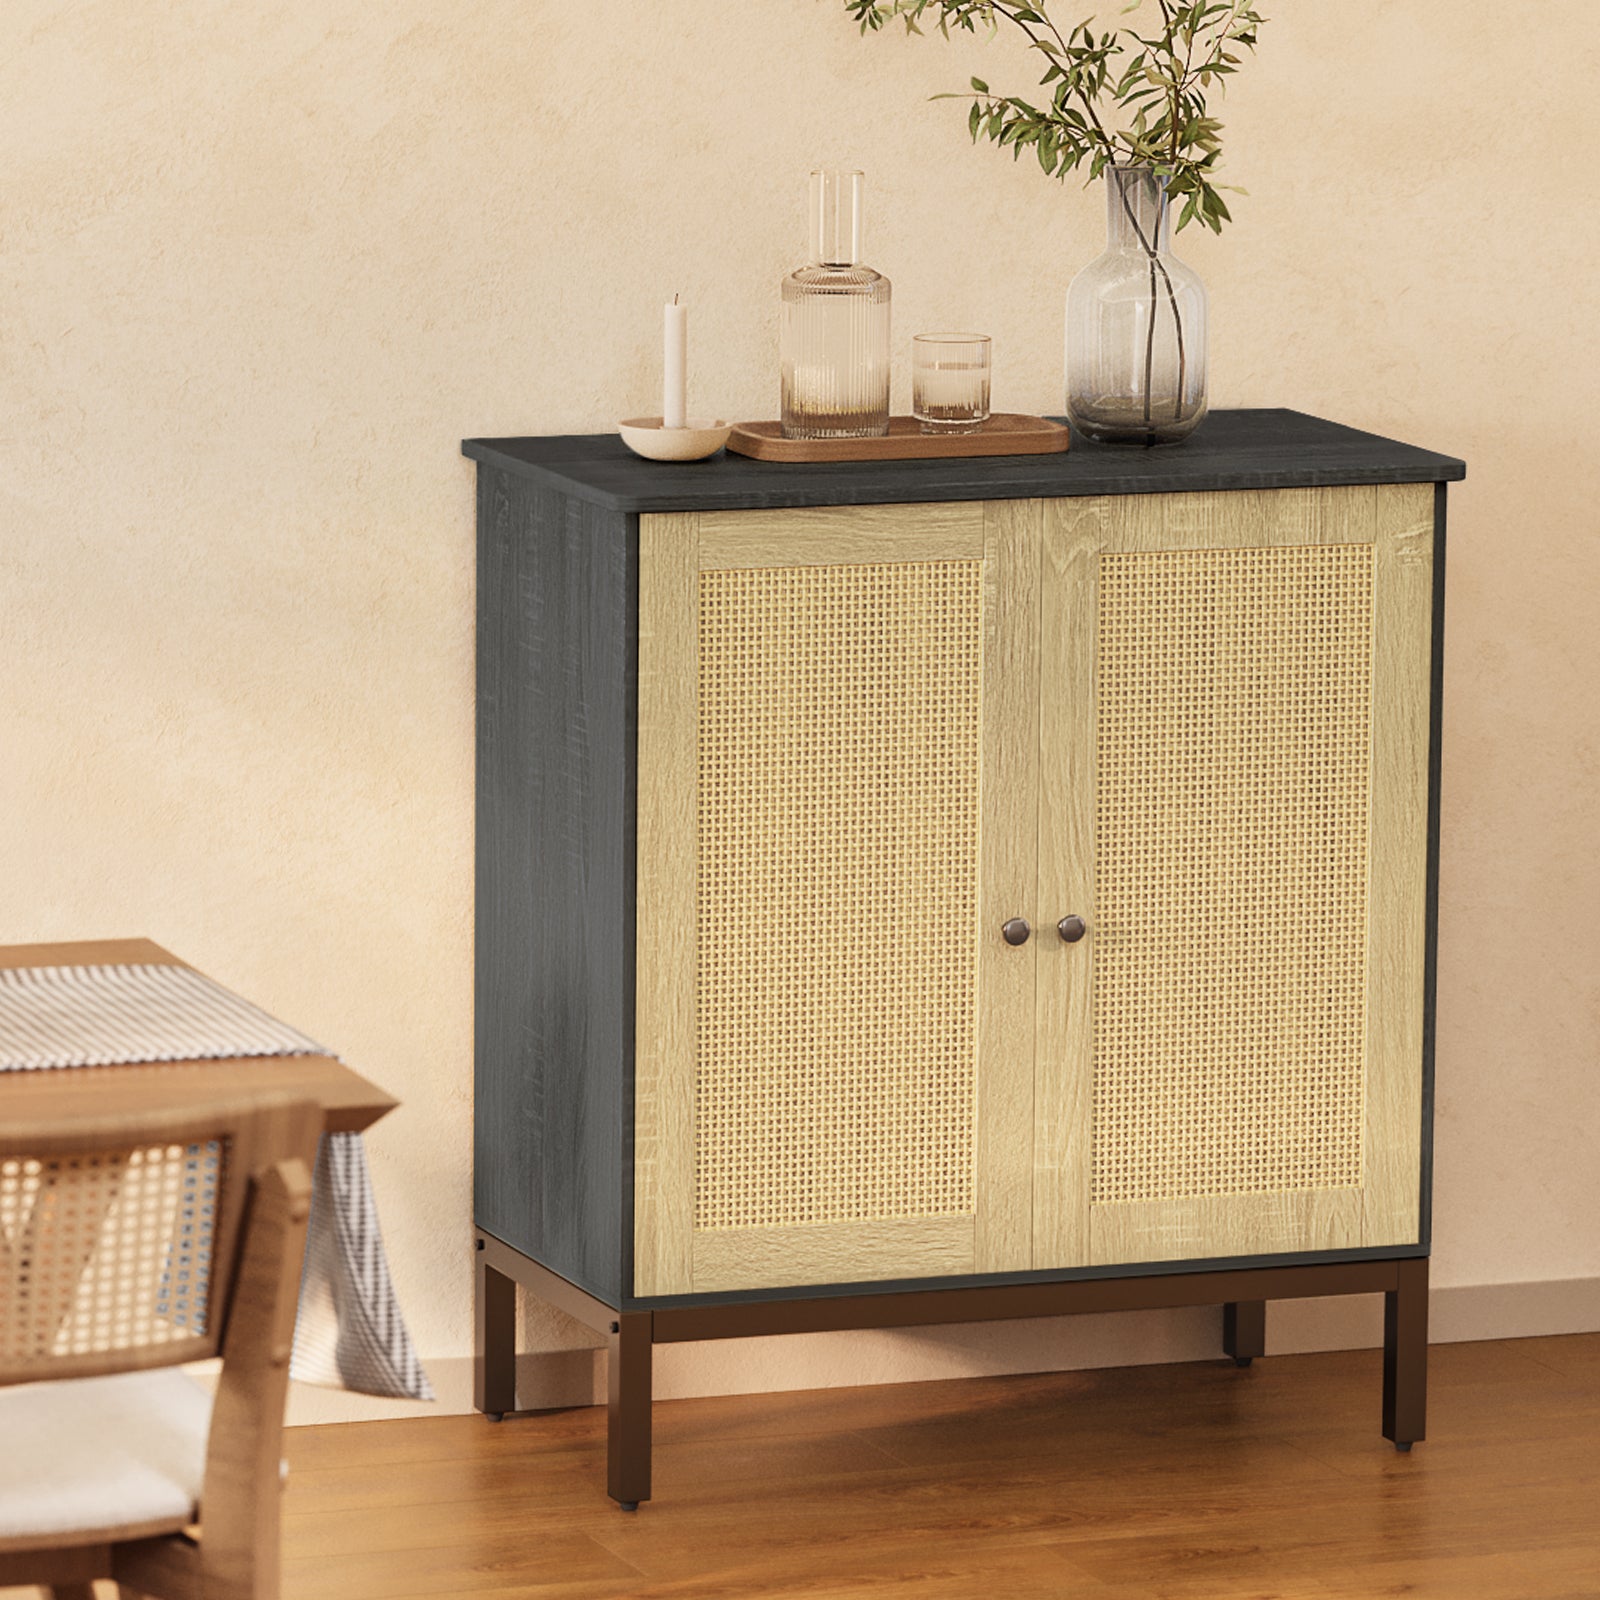 Gizoon AP50 Accent Sideboard Buffet Storage Cabinet with Rattan Doors